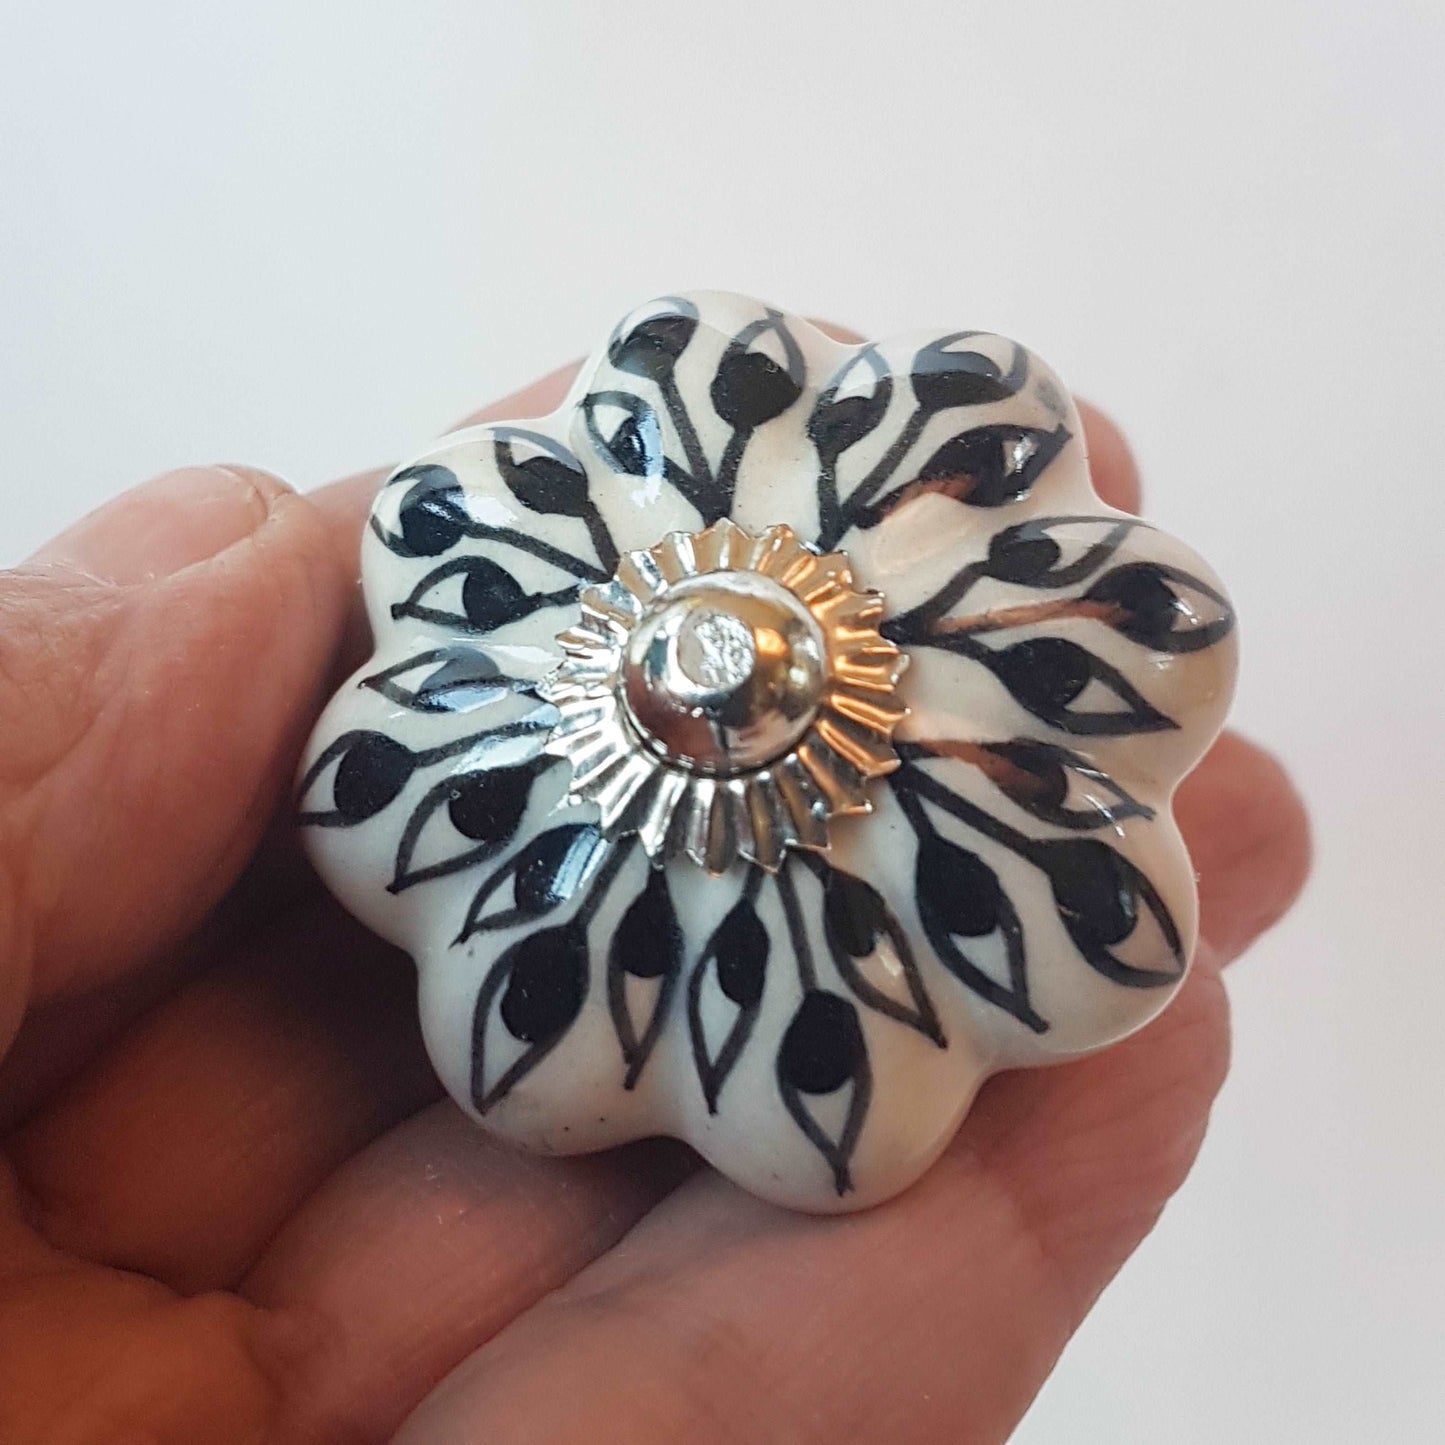 Andromeda set of 8 hand painted cabinet drawer knobs with botanical patterns in black & white.  Exclusive designer collection. In stock now!